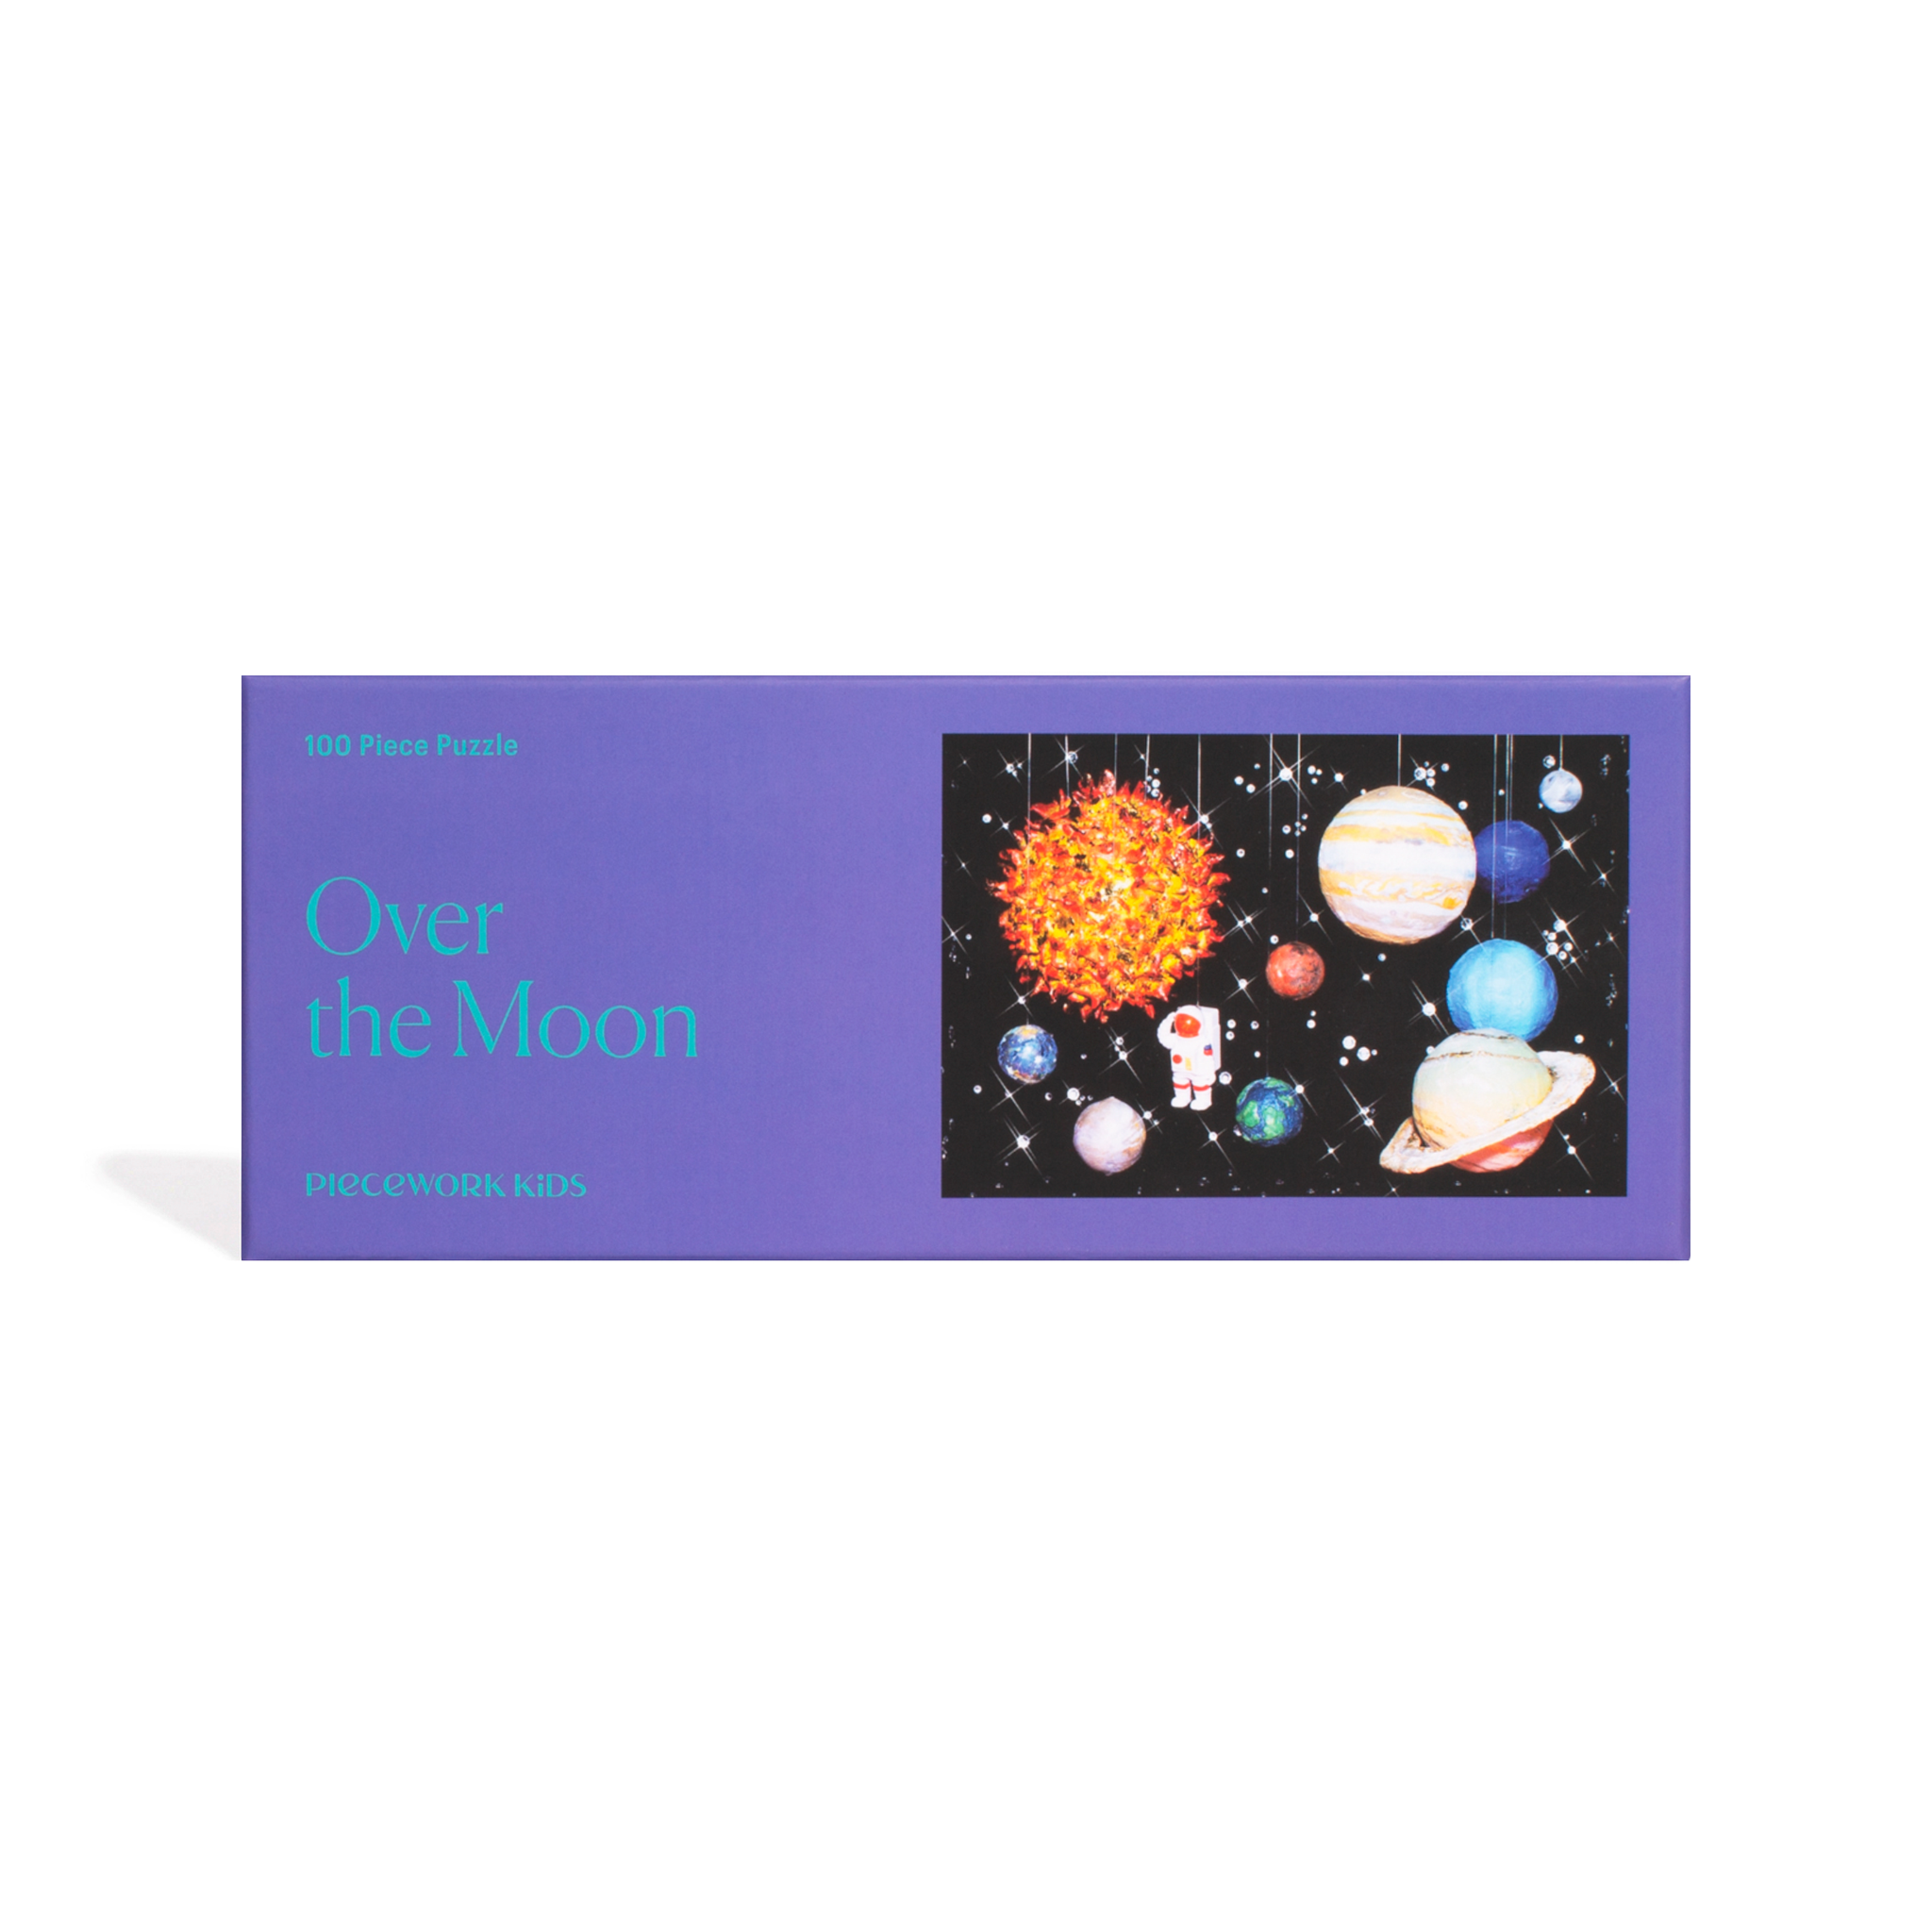 "Over the Moon" Puzzle - 100 Piece